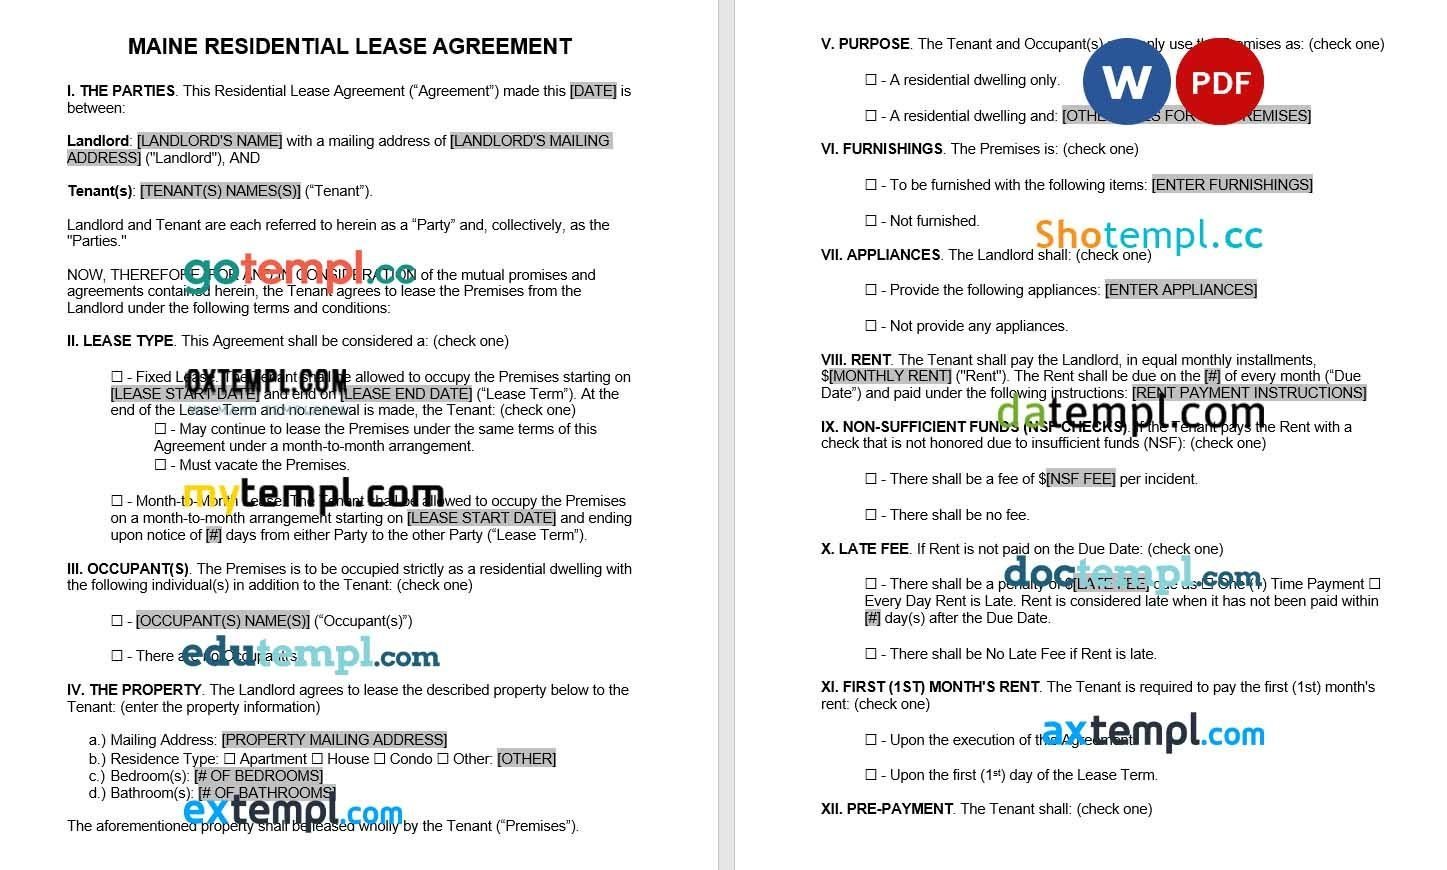 Maine Residential Lease Agreement Word example, fully editable